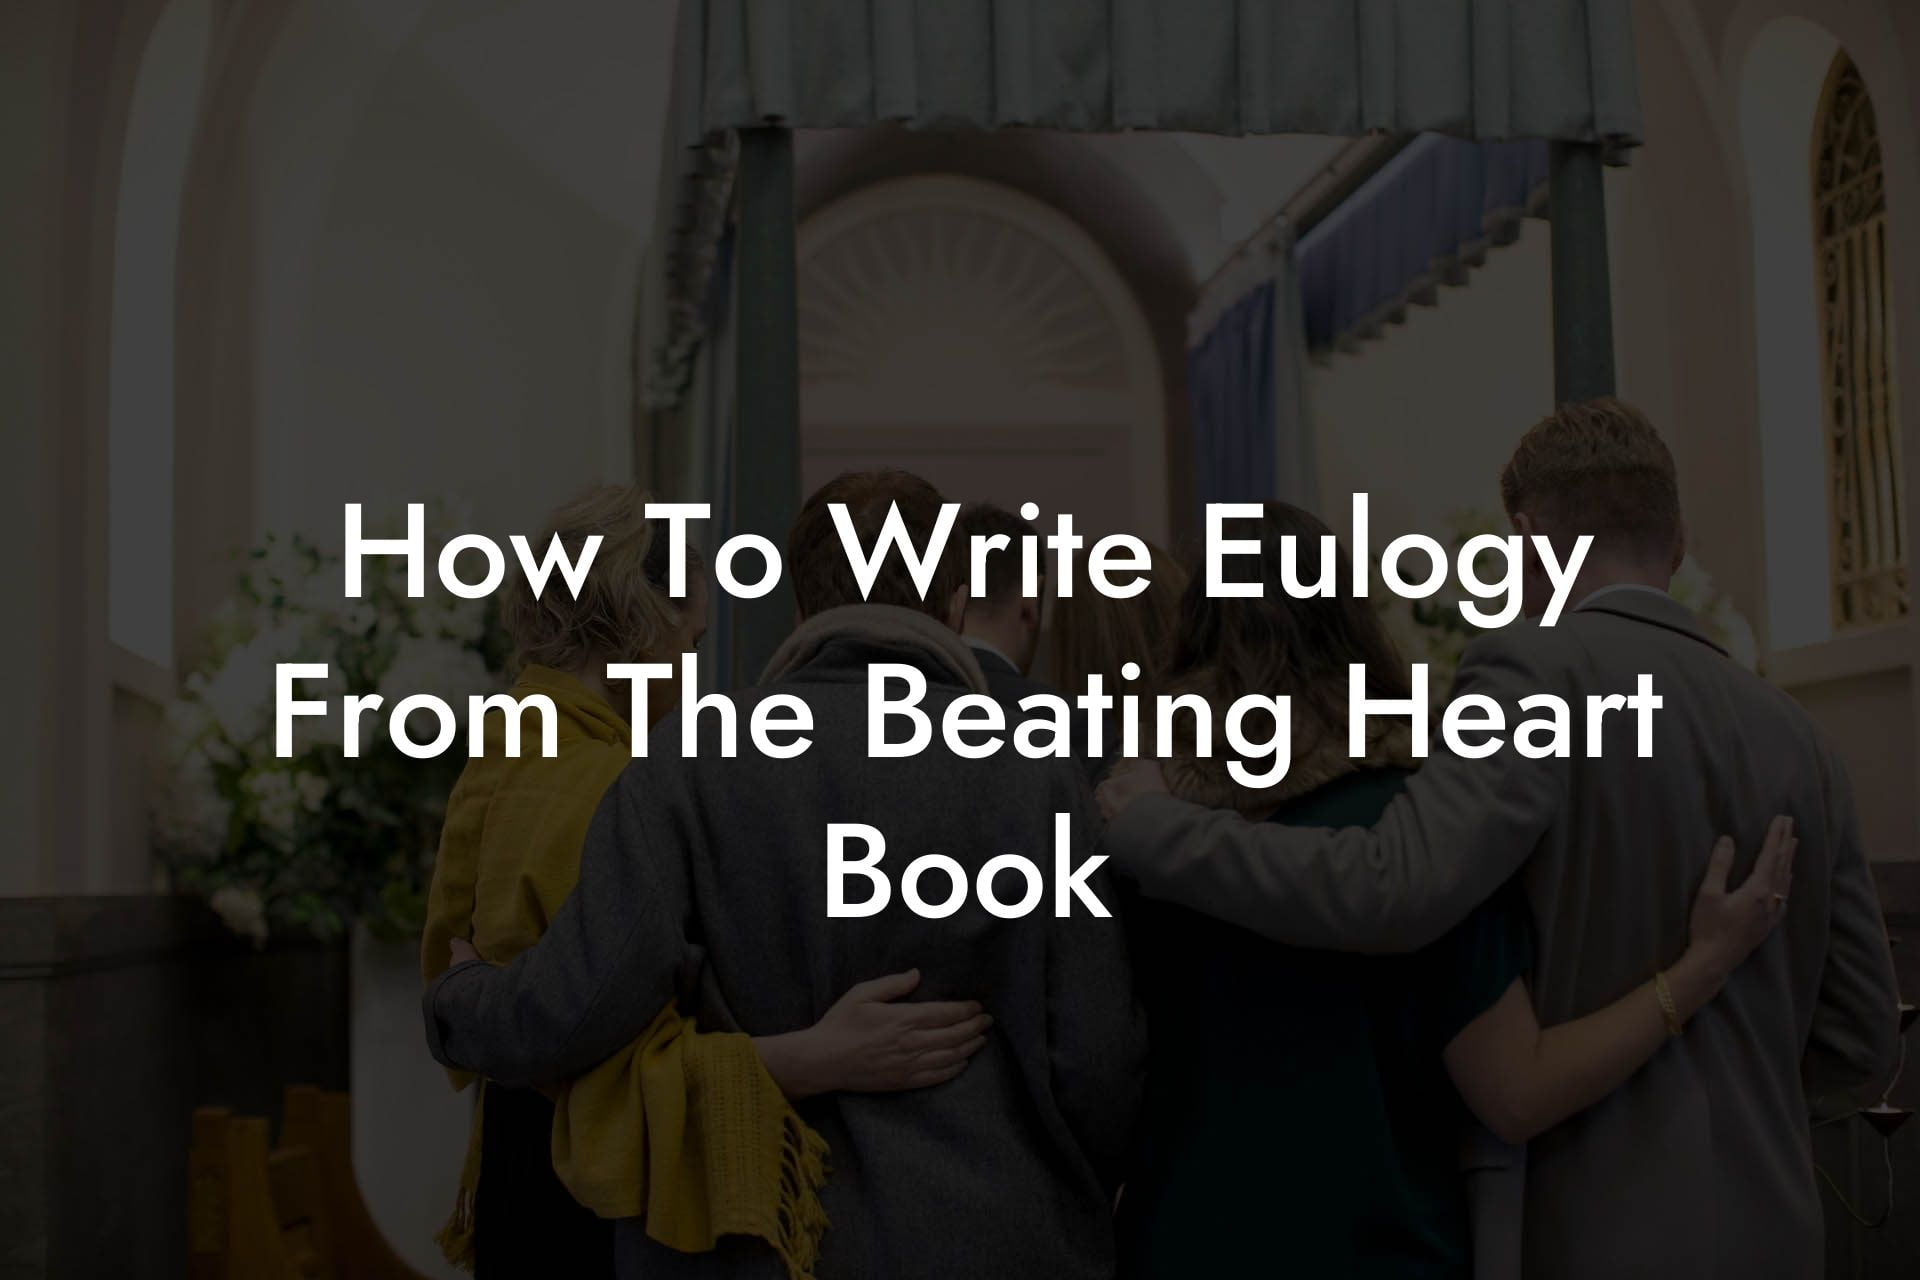 How To Write Eulogy From The Beating Heart Book